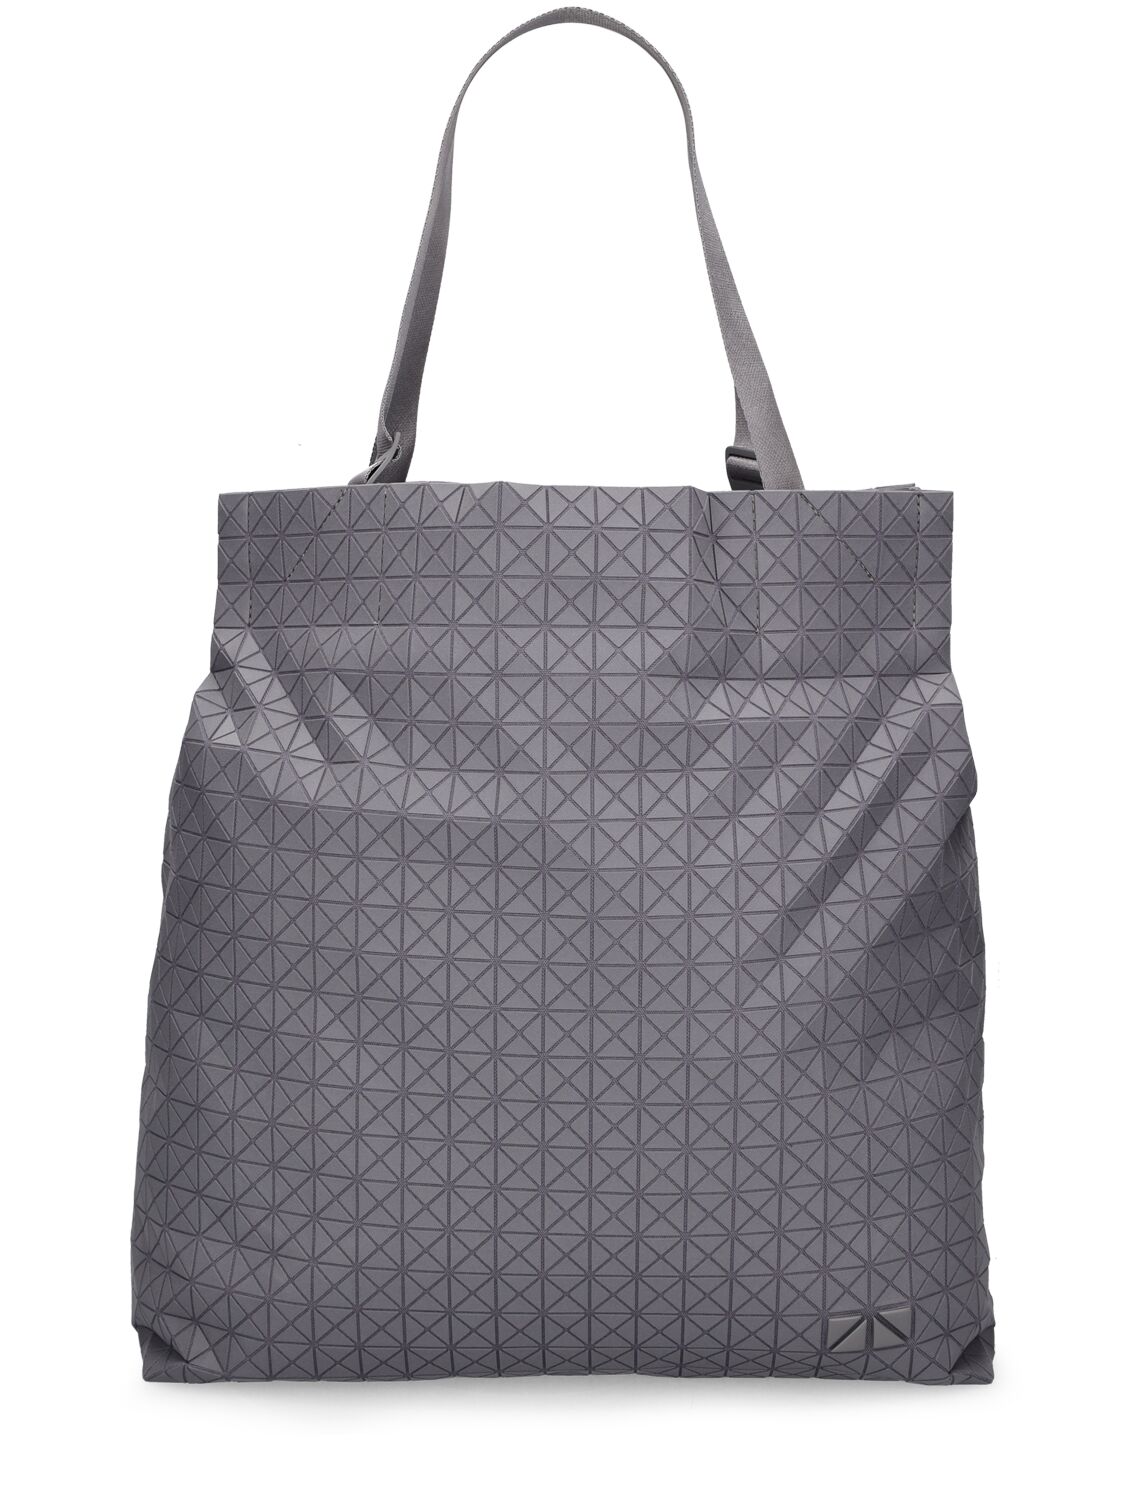 Image of Small Cart Cotton Tote Bag